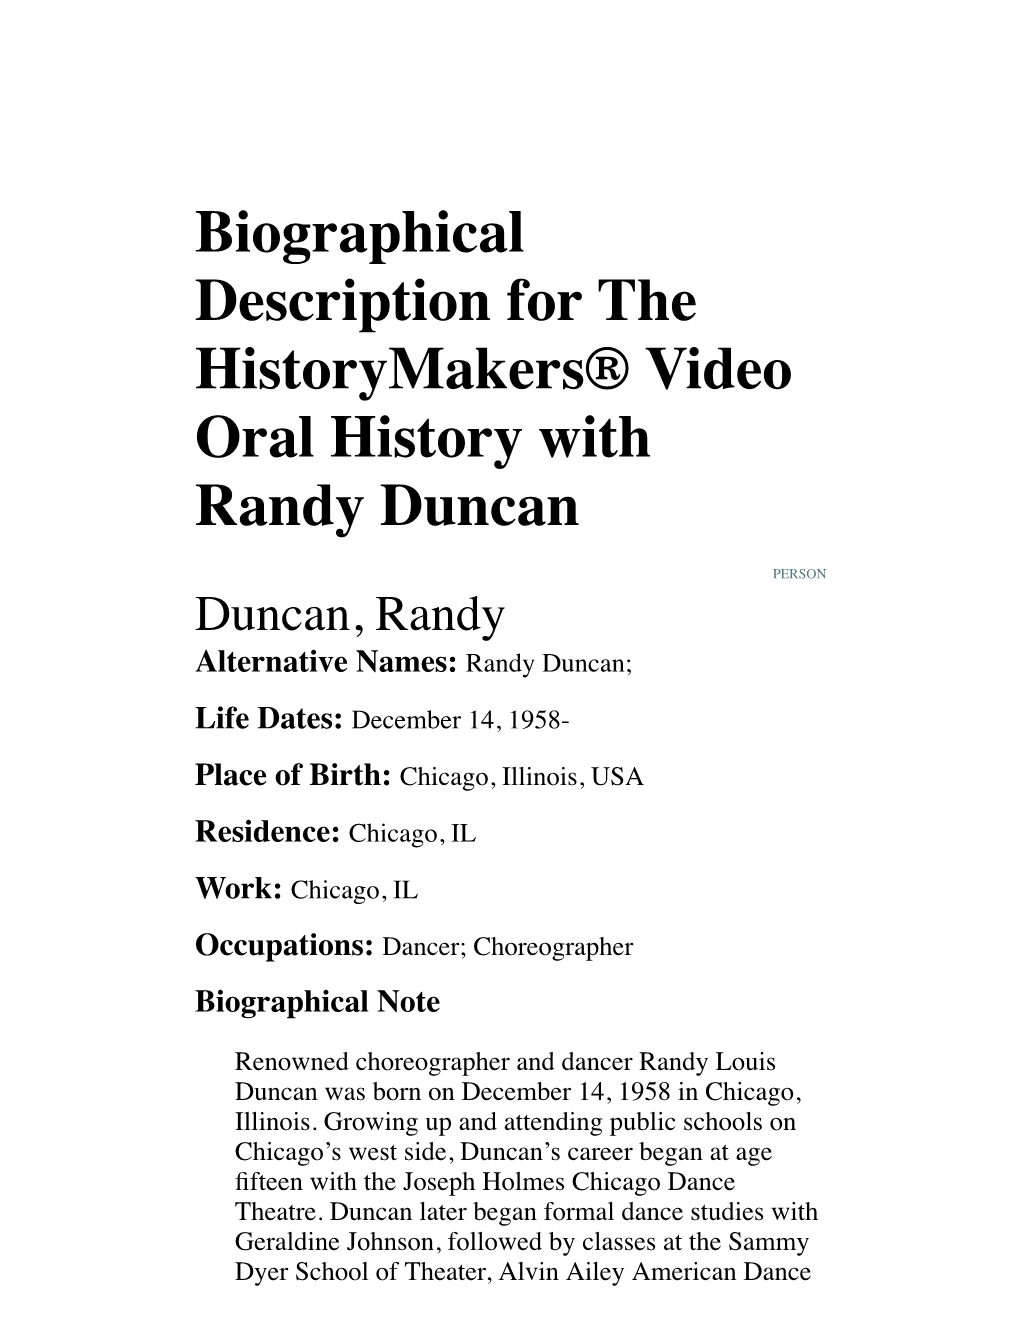 Biographical Description for the Historymakers® Video Oral History with Randy Duncan